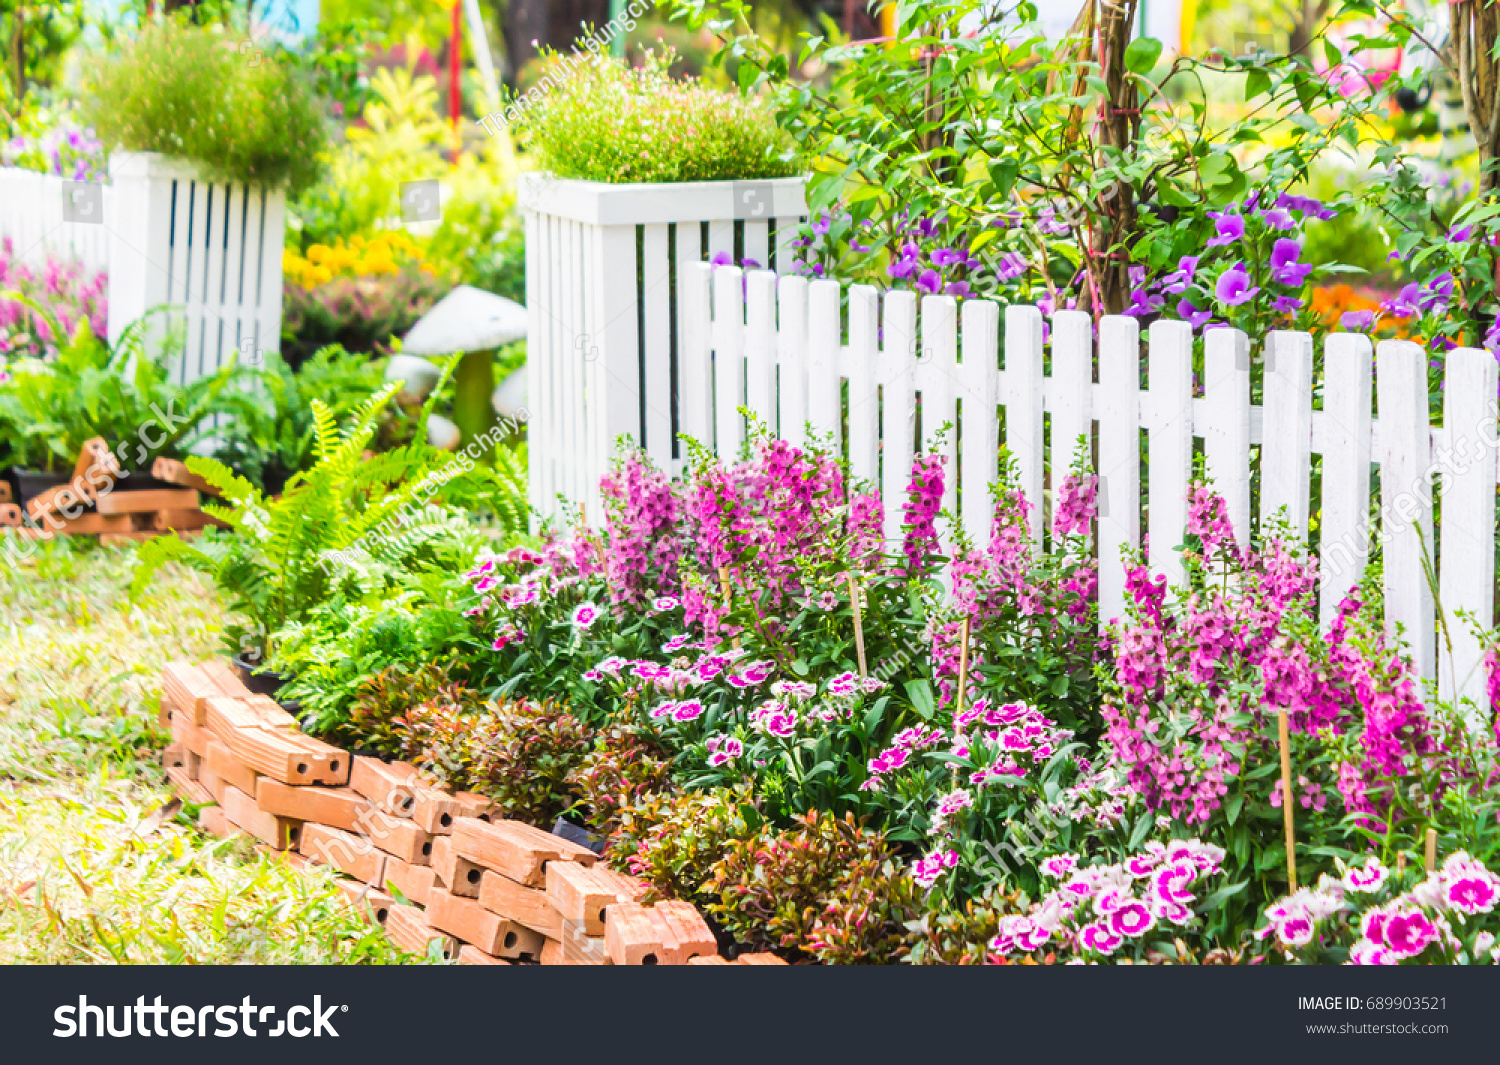 white picket fence surrounded by flowers stock photo (edit now